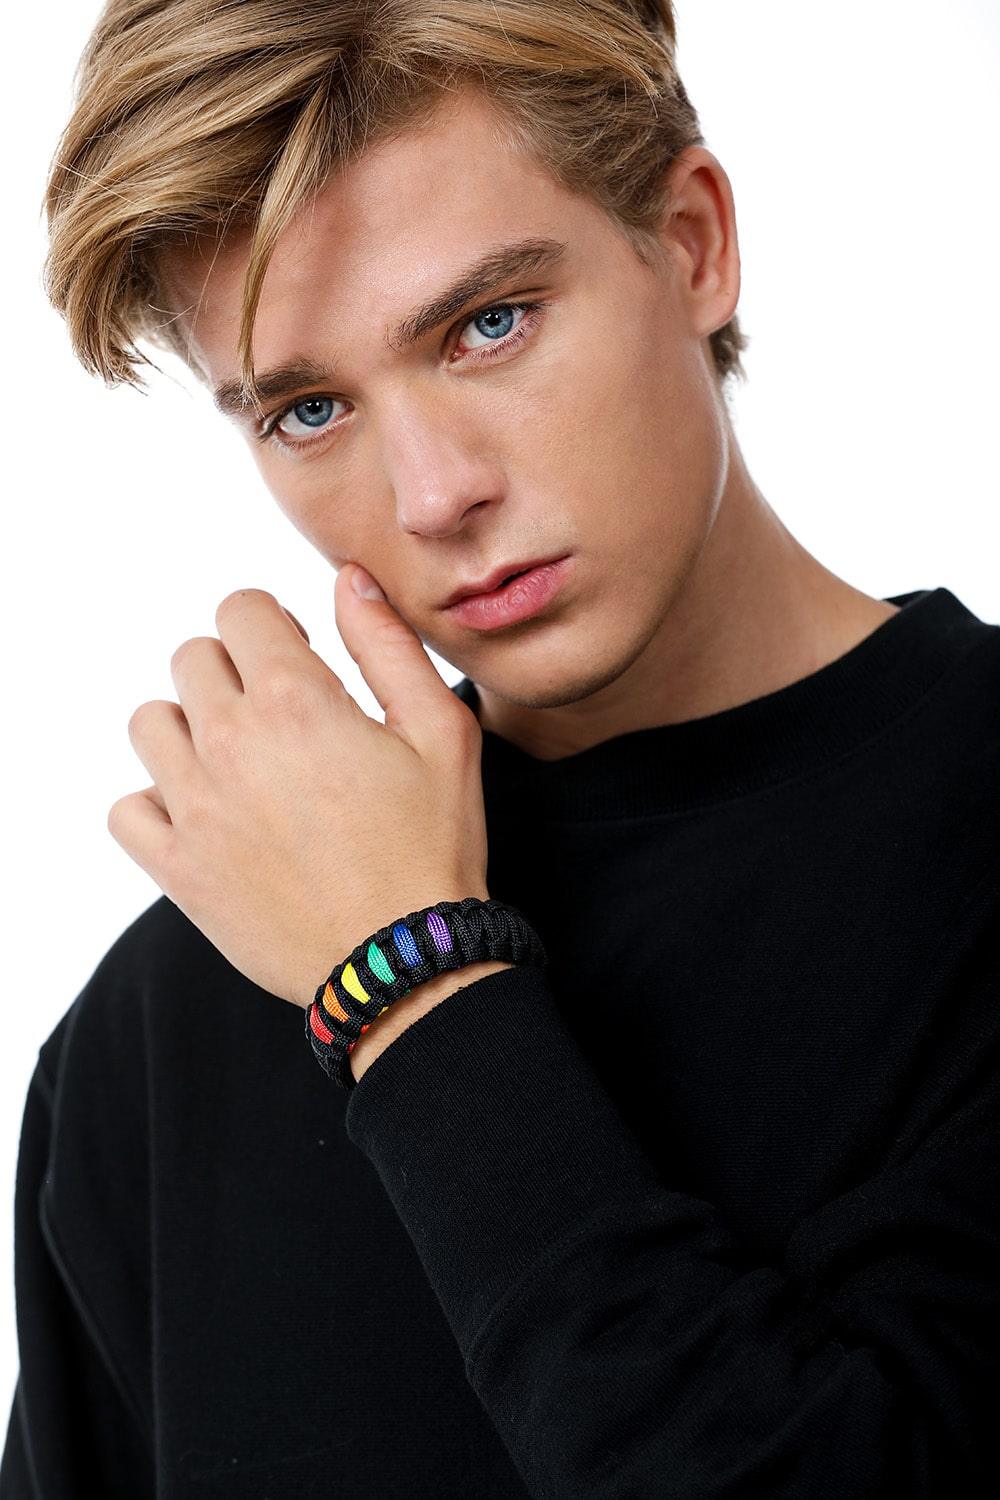 Stylish model elegantly wearing the TOMSCOUT LGBTQ+ Pride Paracord Bracelet with a striking rainbow design, a sustainable and fashionable accessory for expressing LGBTQ+ pride and solidarity.